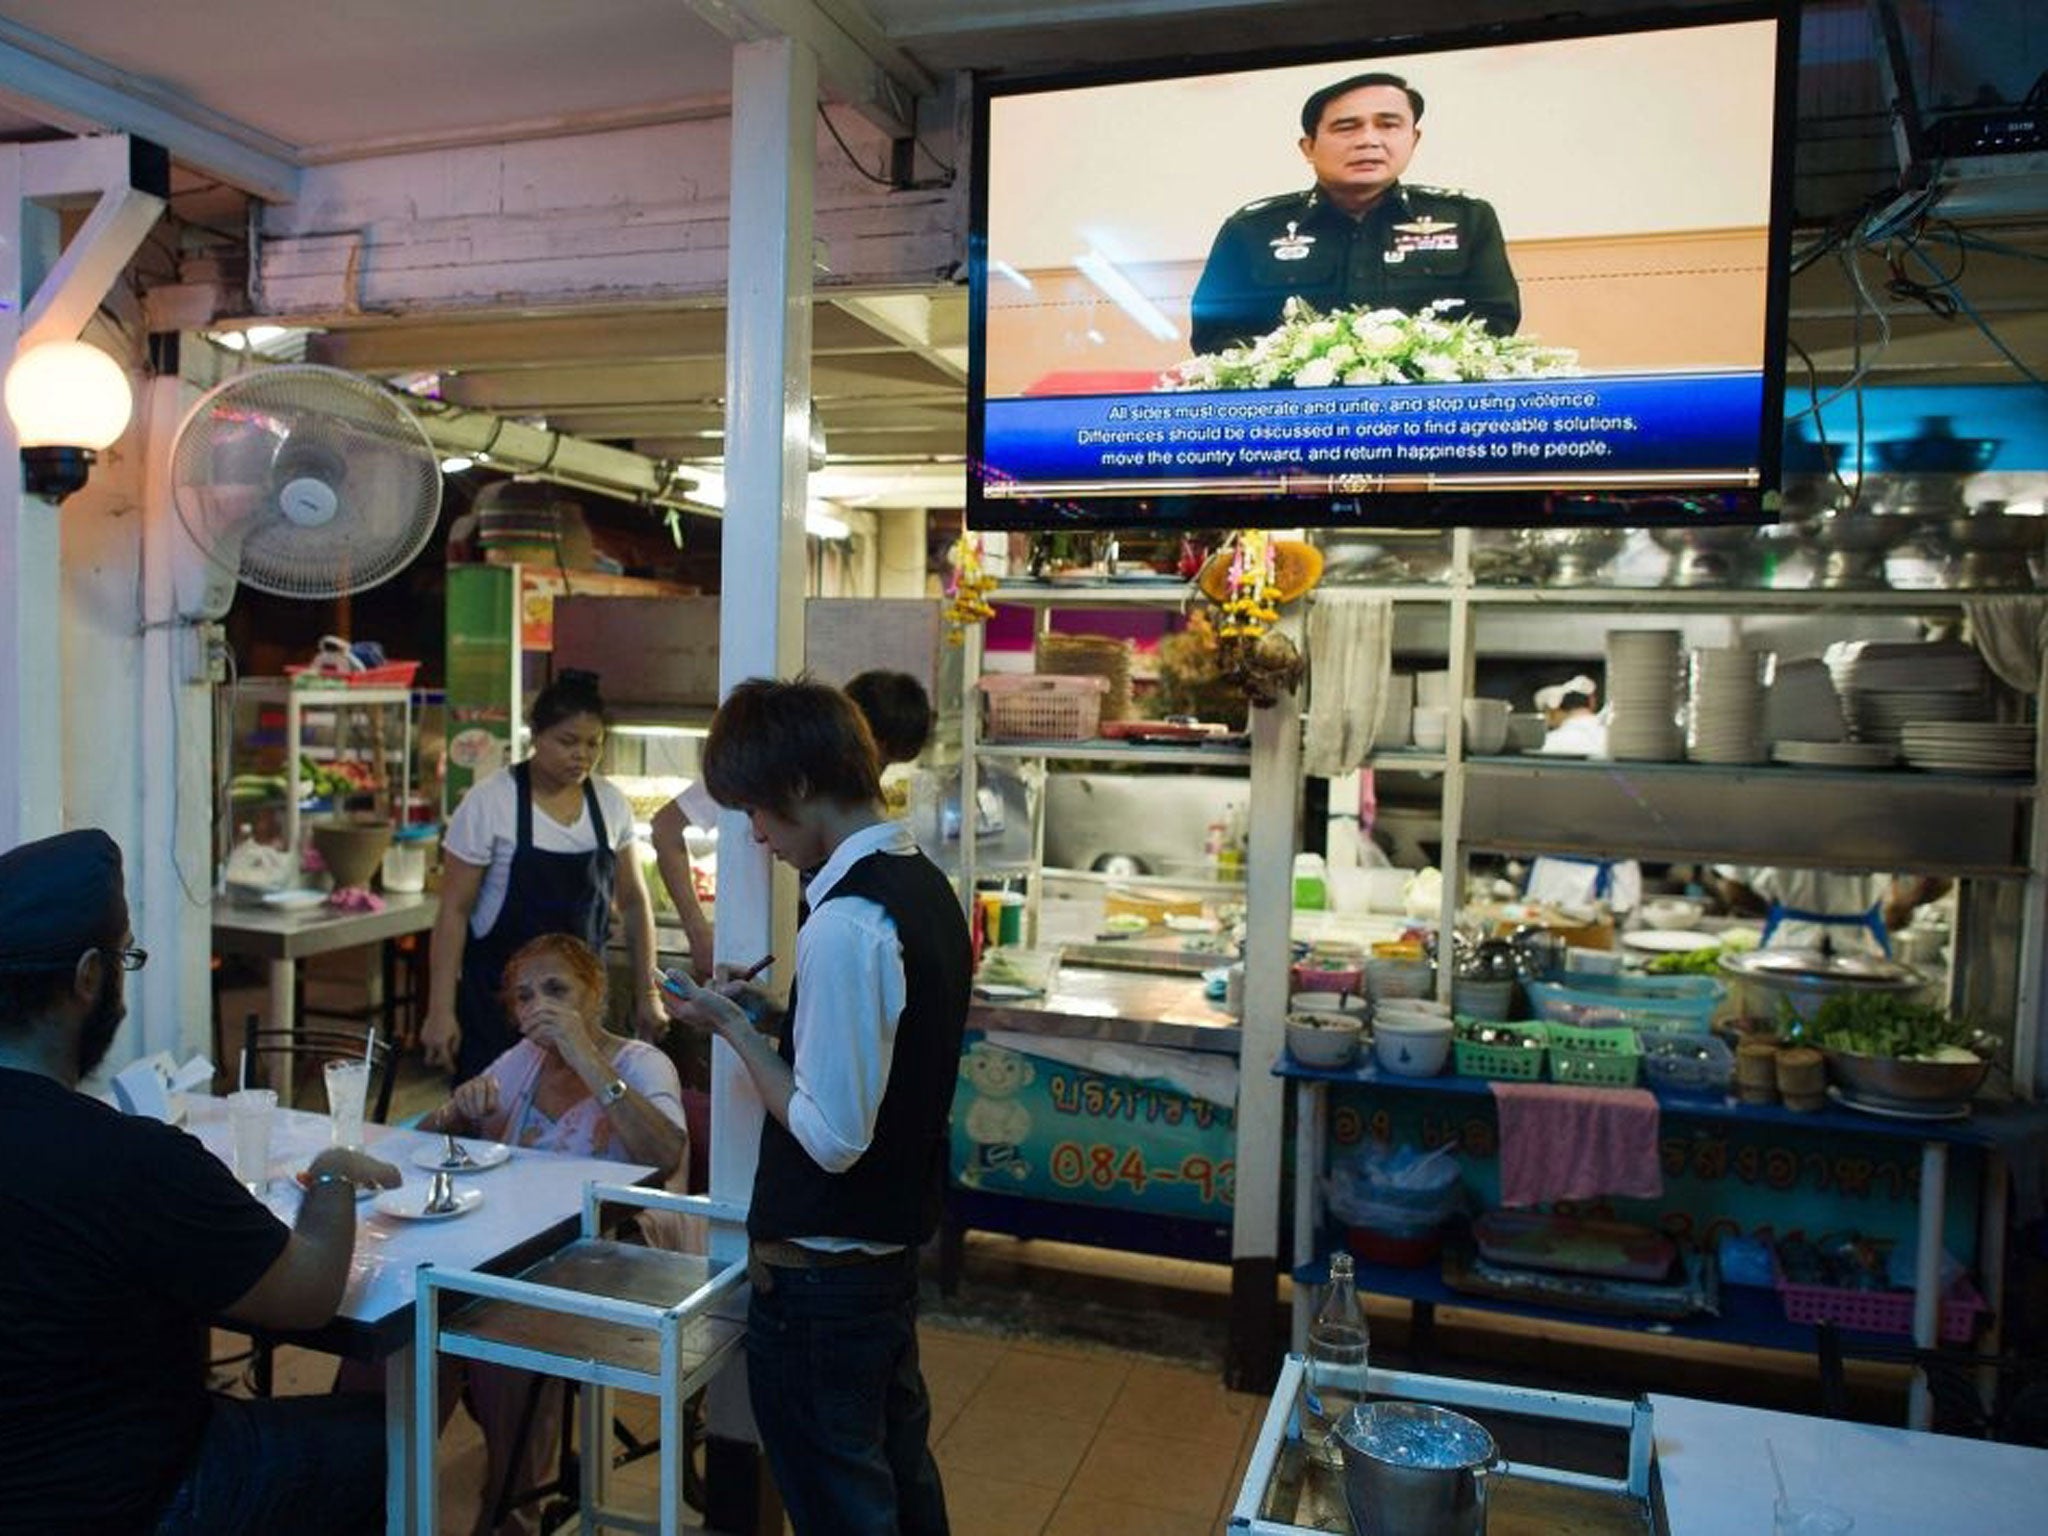 Thai army chief General Prayut Chan-O-Cha (C) is seen making a speech on a television set as a waiter takes an order at a Thai restaurant in Bangkok on May 30, 2014. The European Union has voiced "extreme concern" about political detentions and censorship